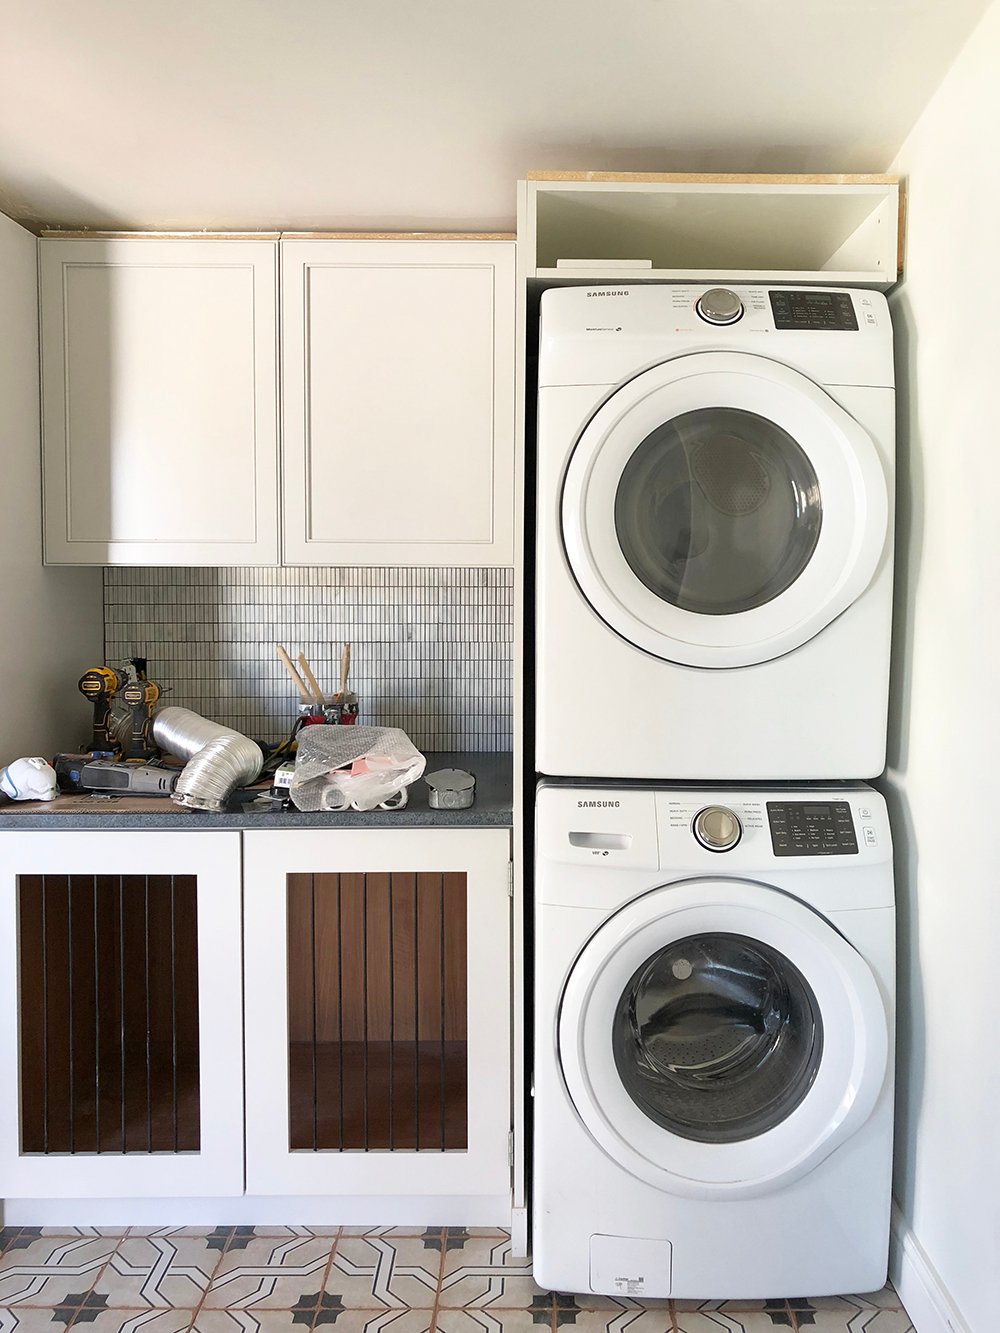 Laundry Room : One Room Challenge – Week 4 - roomfortuesday.com